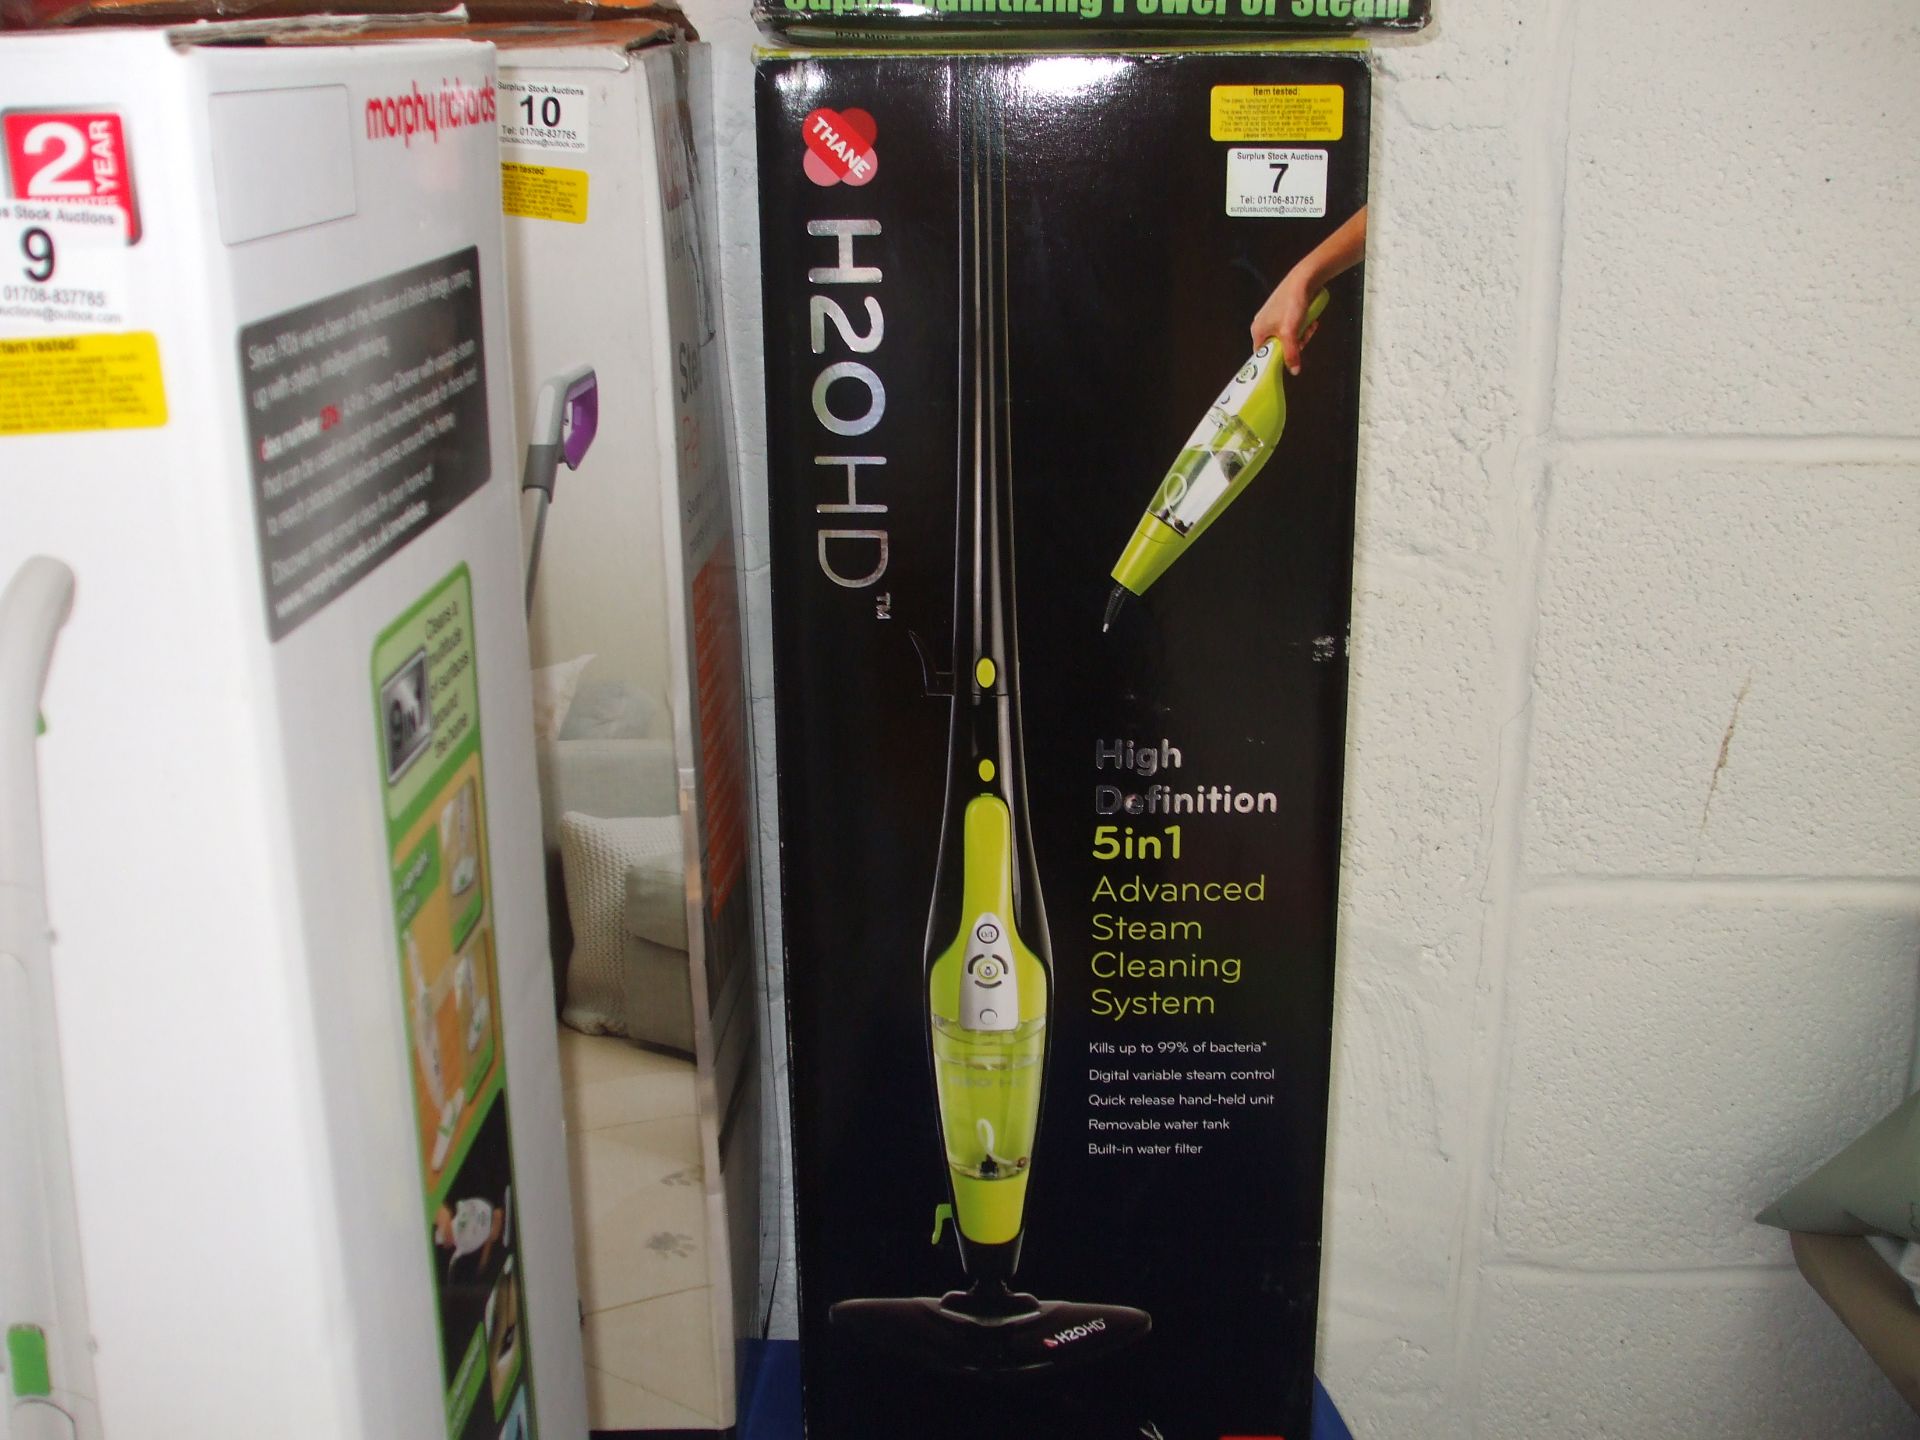 H2O X5 5 in 1 Steam Cleaner (boxed & Tested)